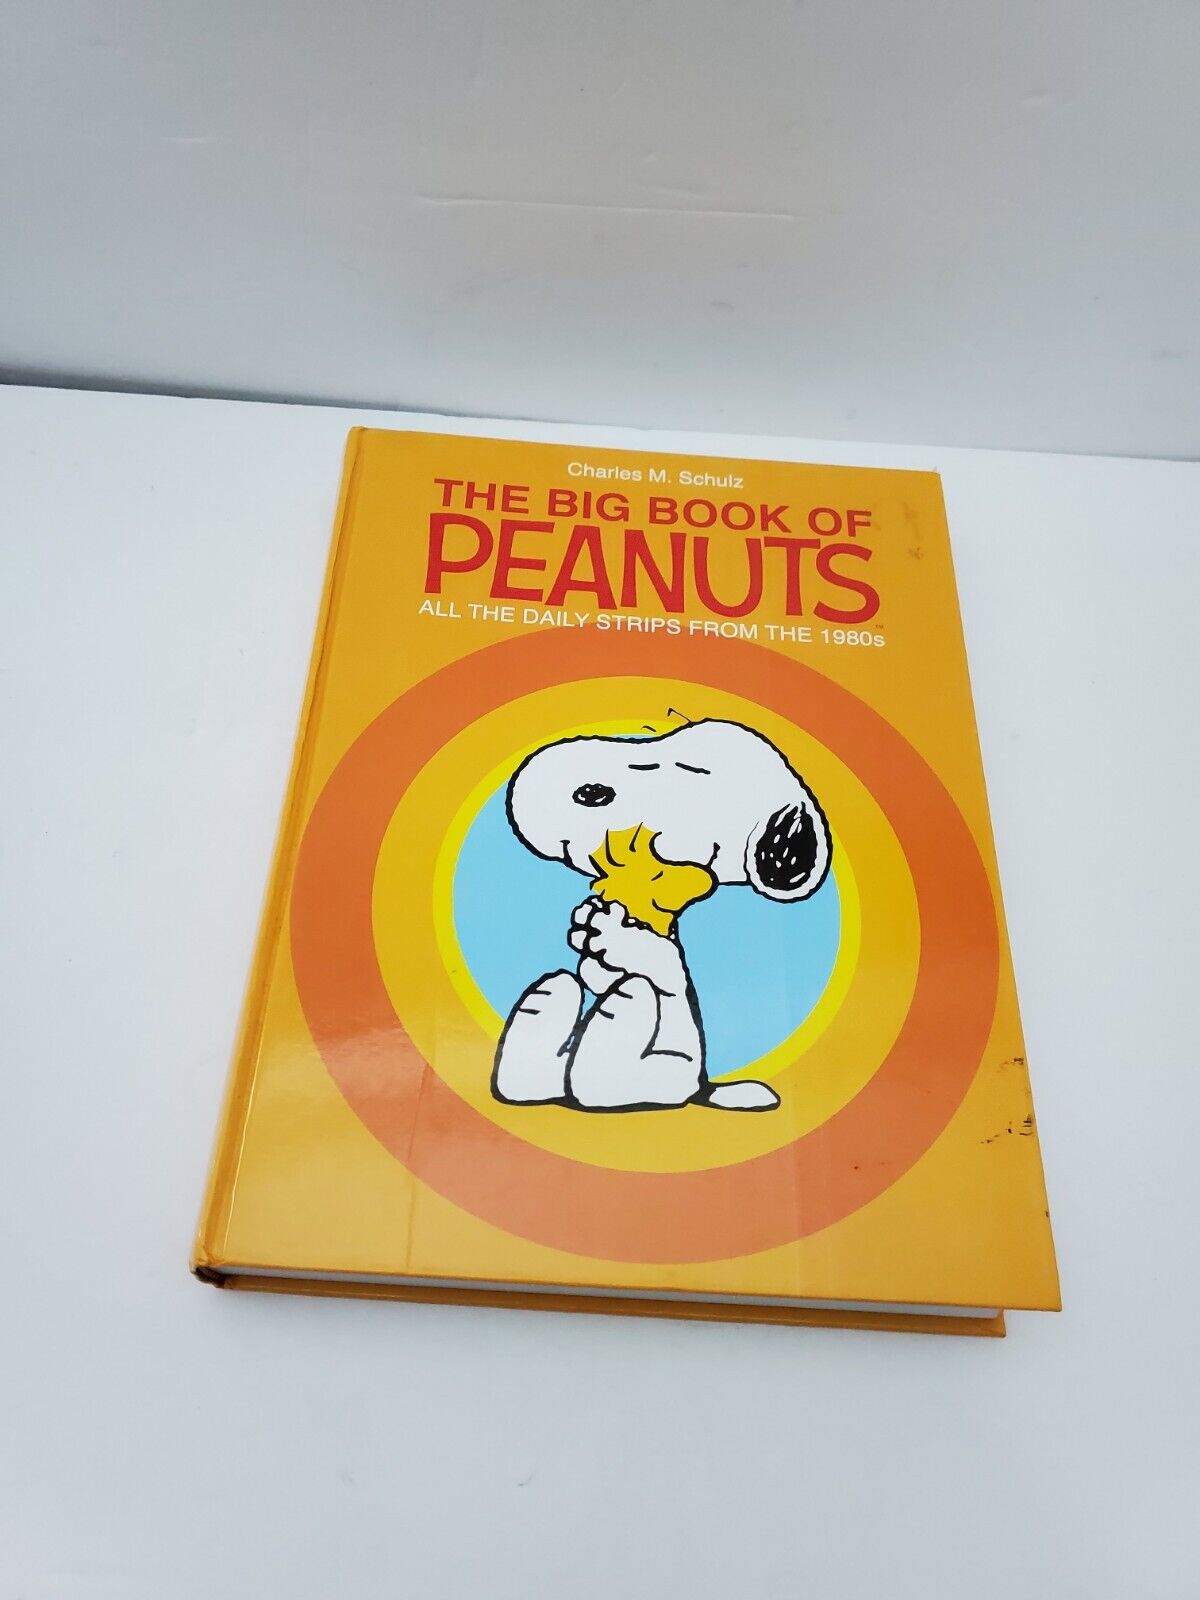 The Big Book of Peanuts: All the Daily Strips from the 1980s (Andrews McMeel